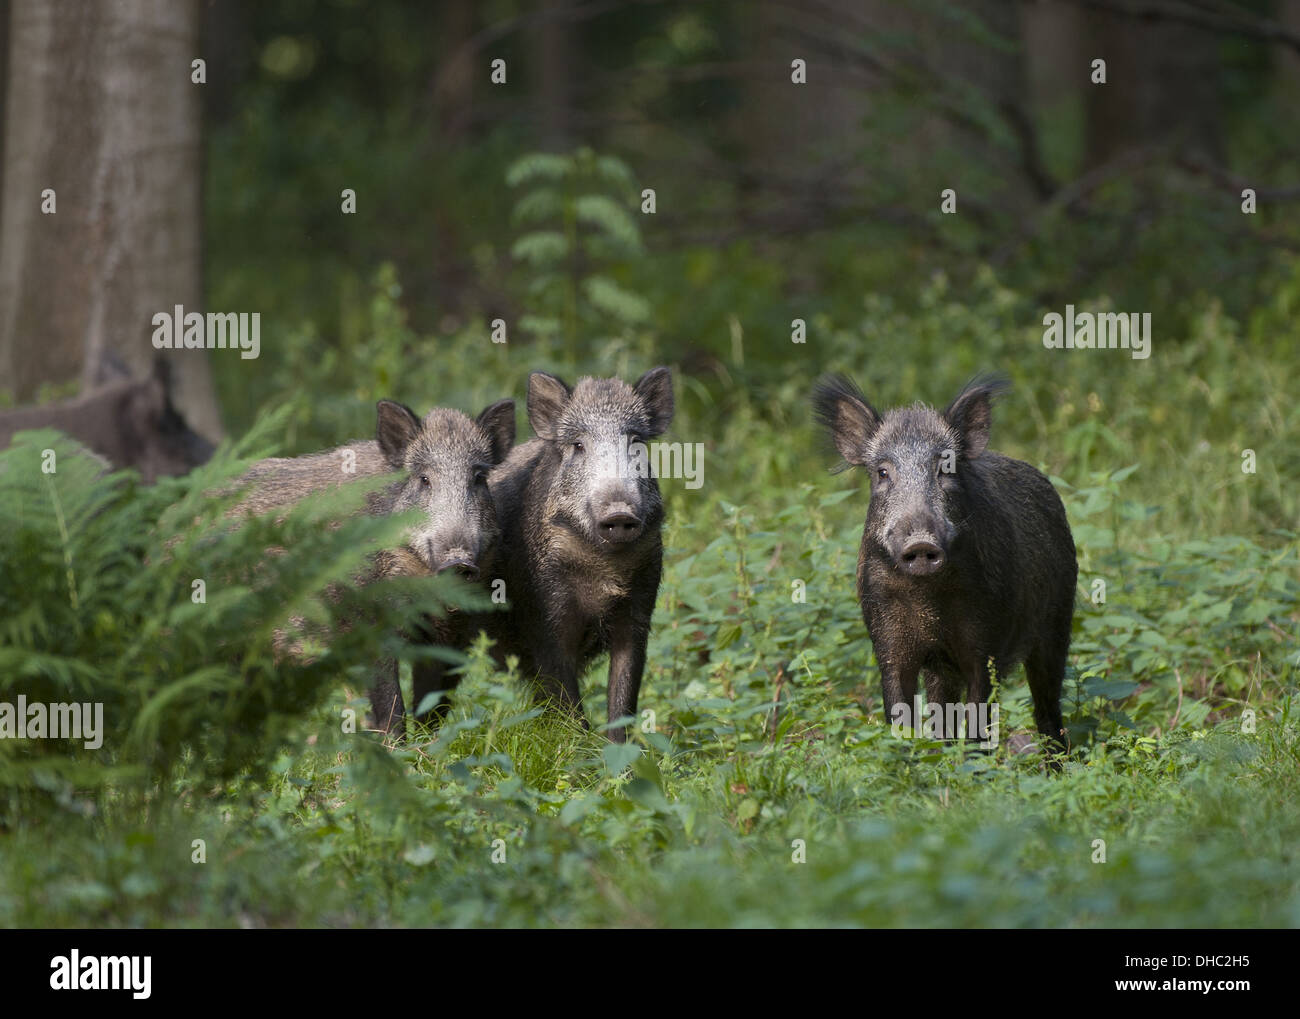 Wild boar in a forest, Sus scrofa, Germany, Europe Stock Photo